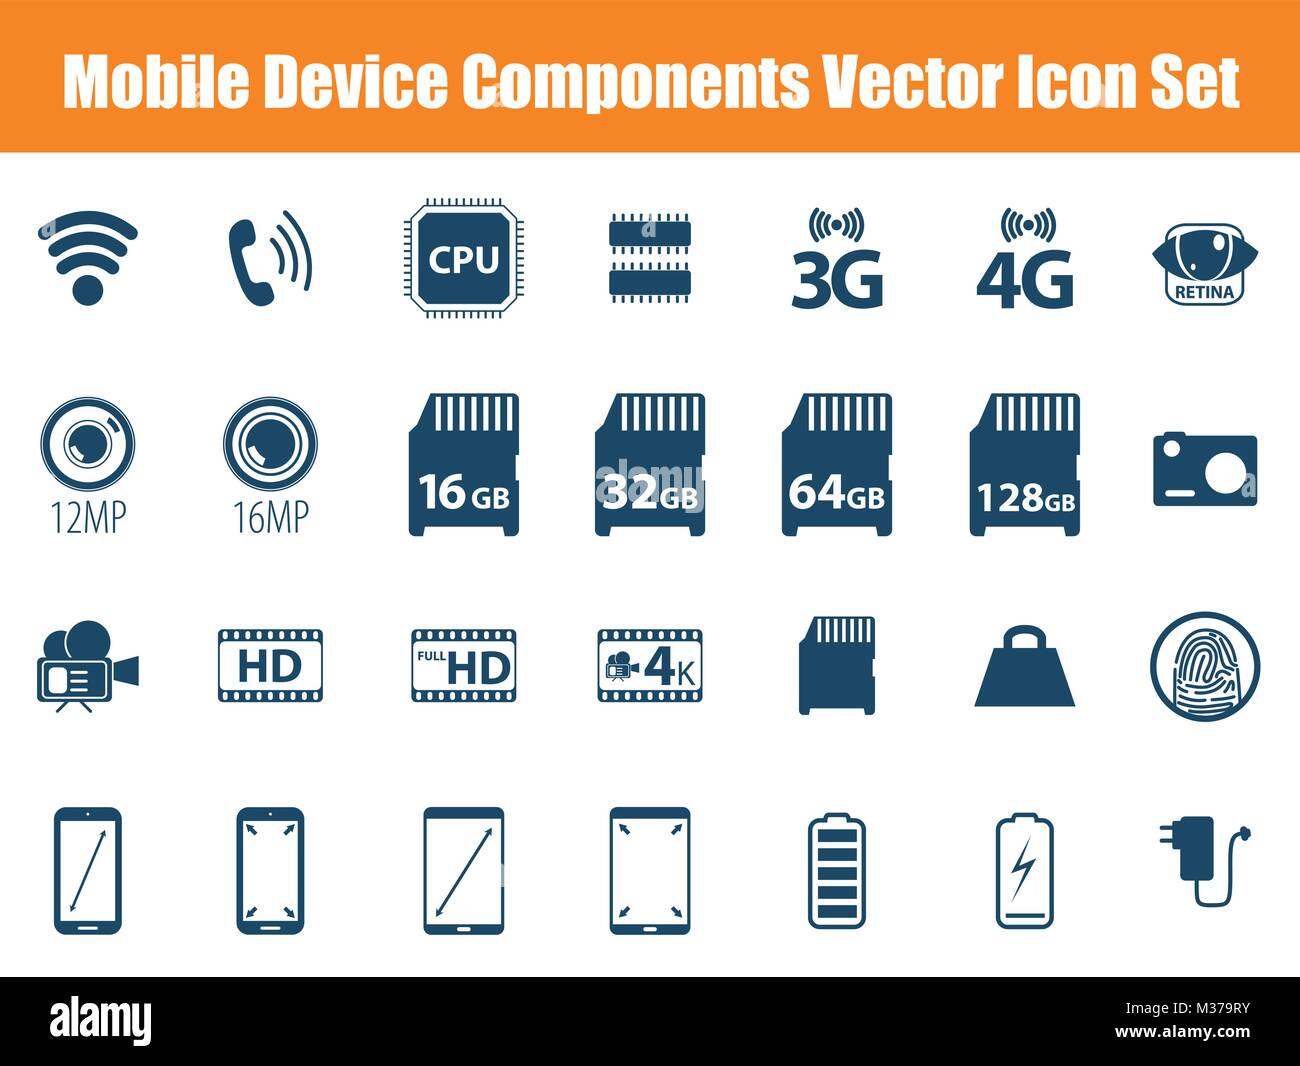 Mobile Device Components Vector Icon Set Stock Vector